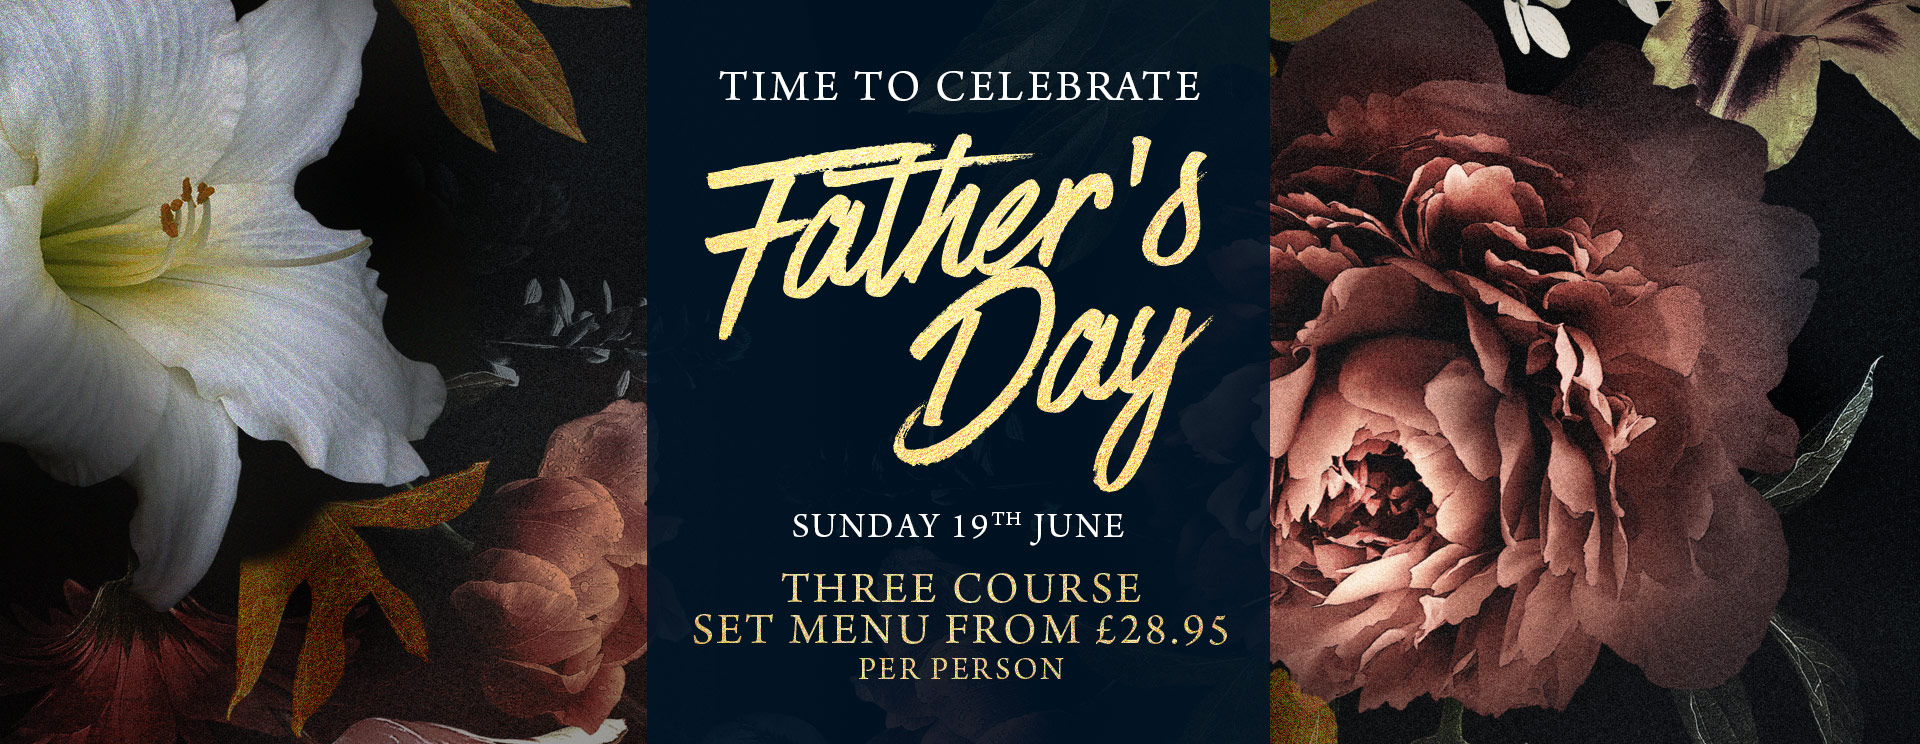 Fathers Day at The Wavendon Arms